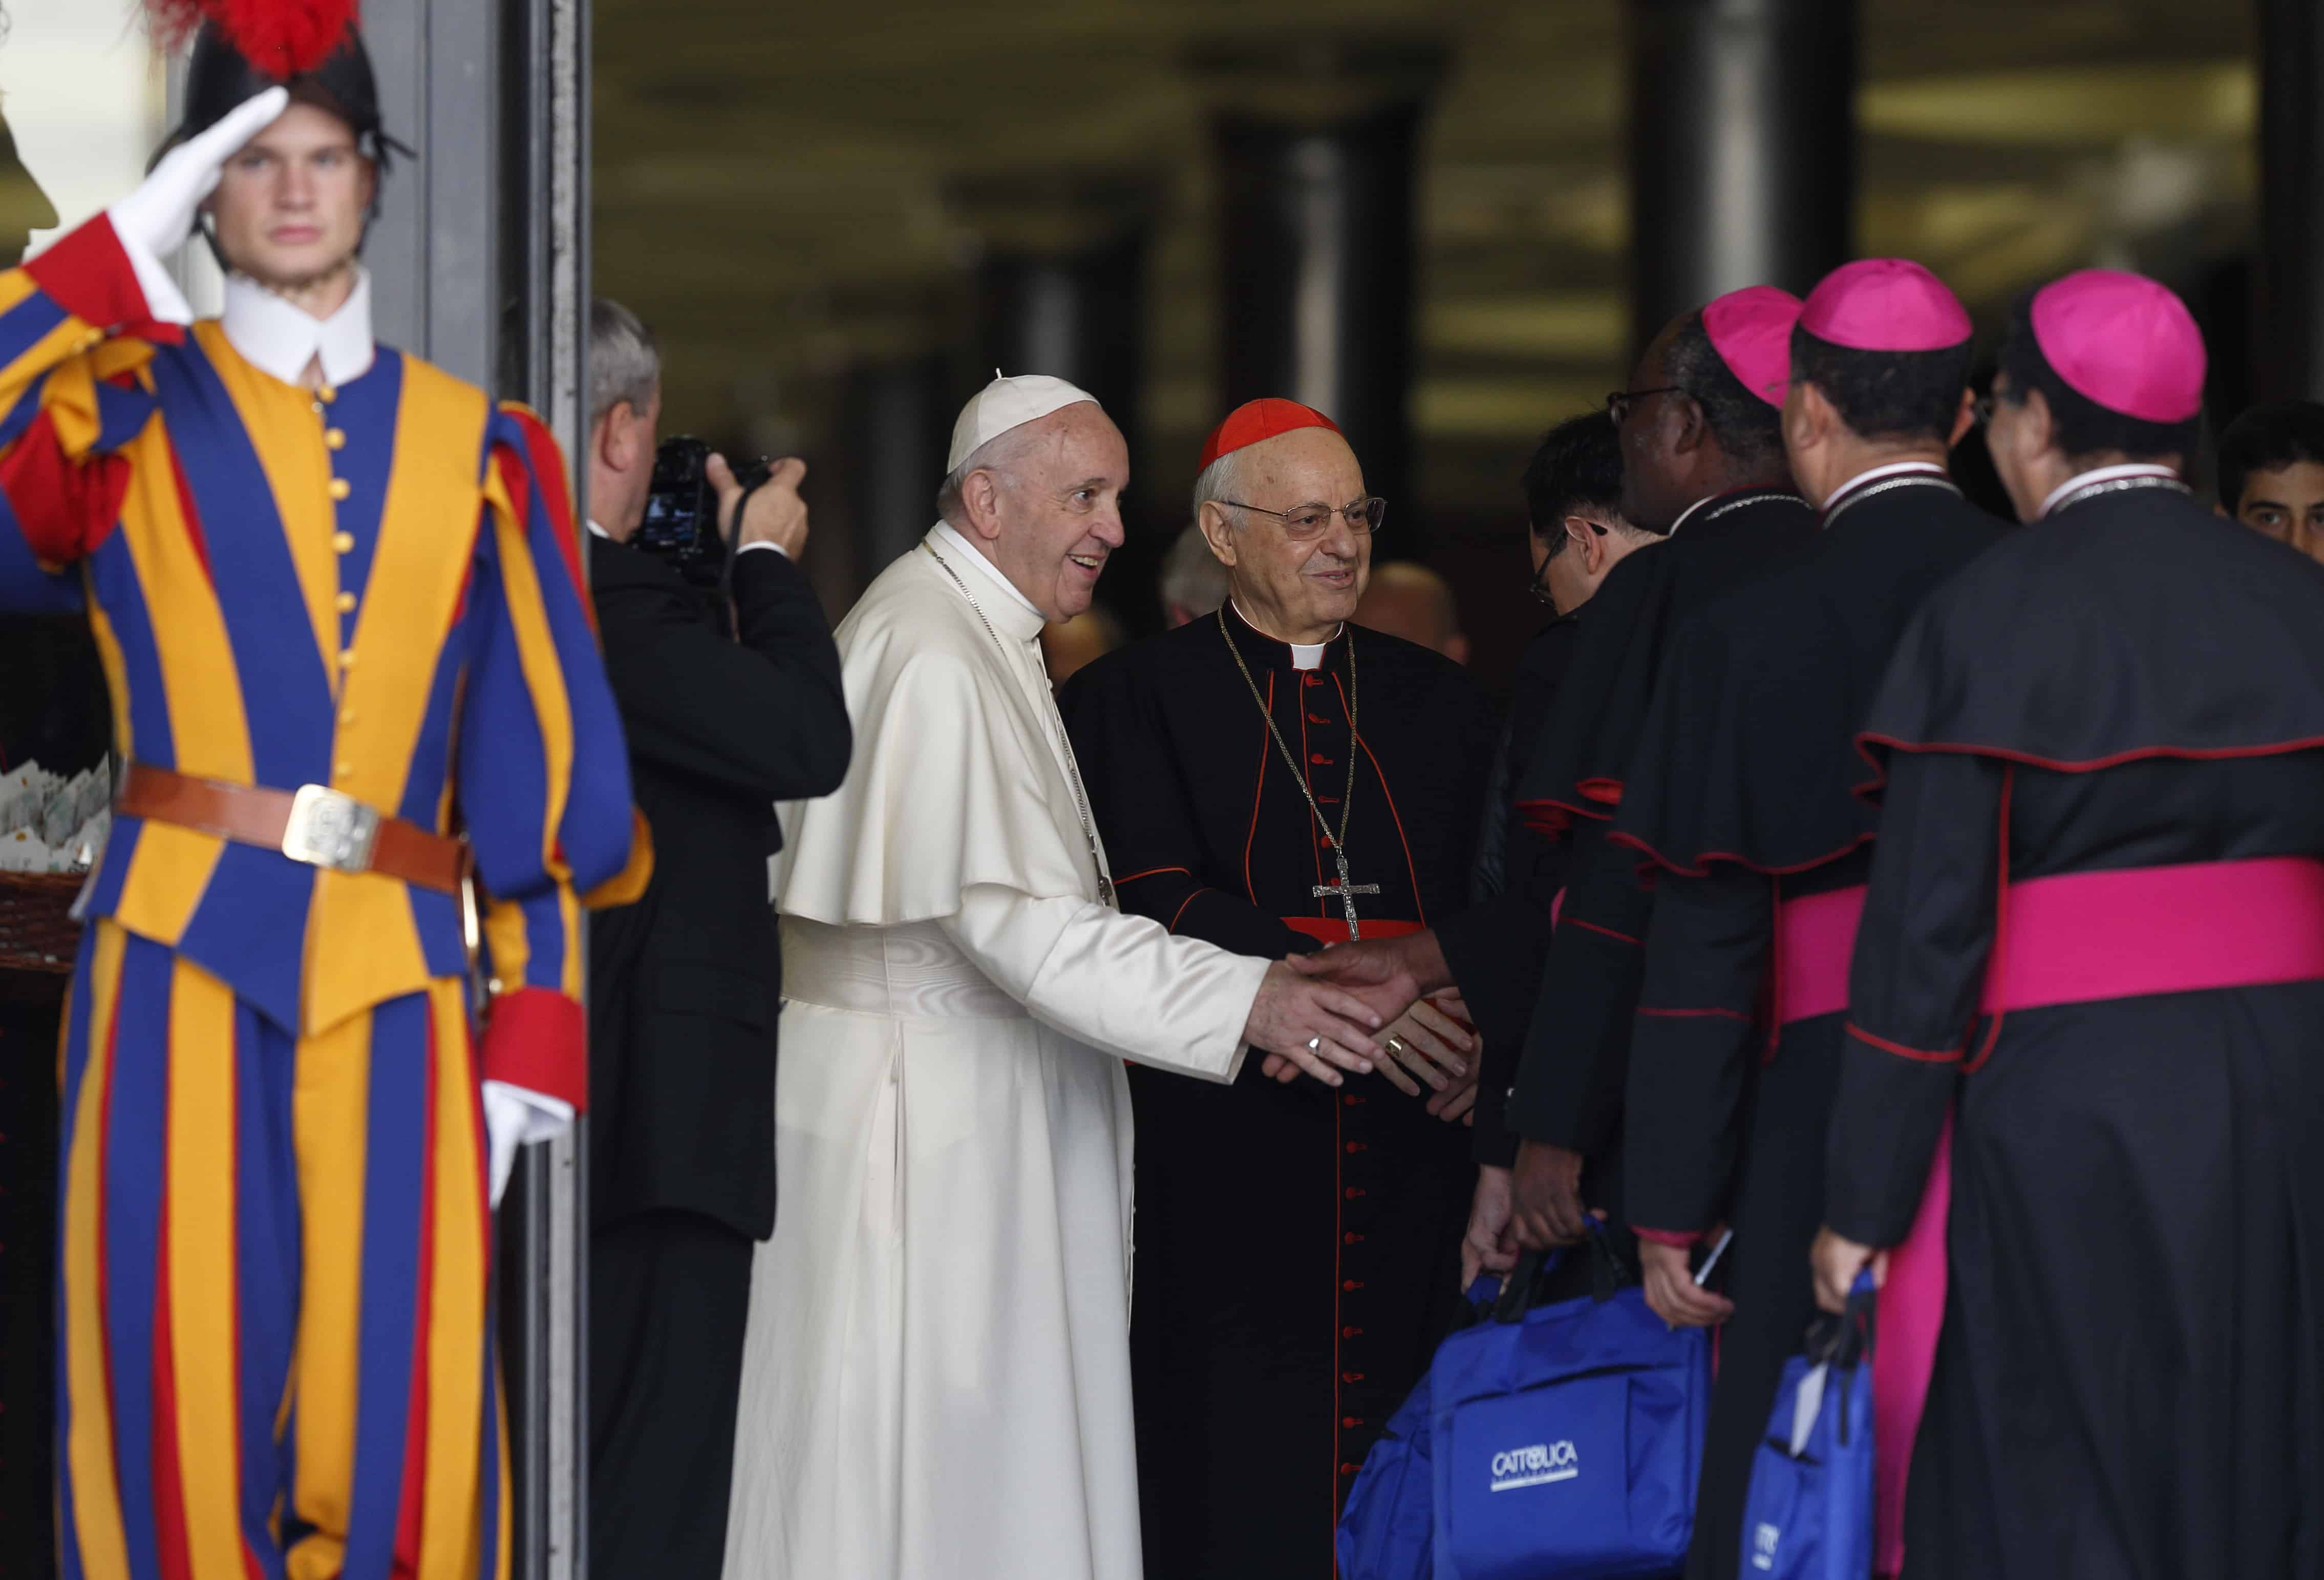 3 Takeaways From The Synod